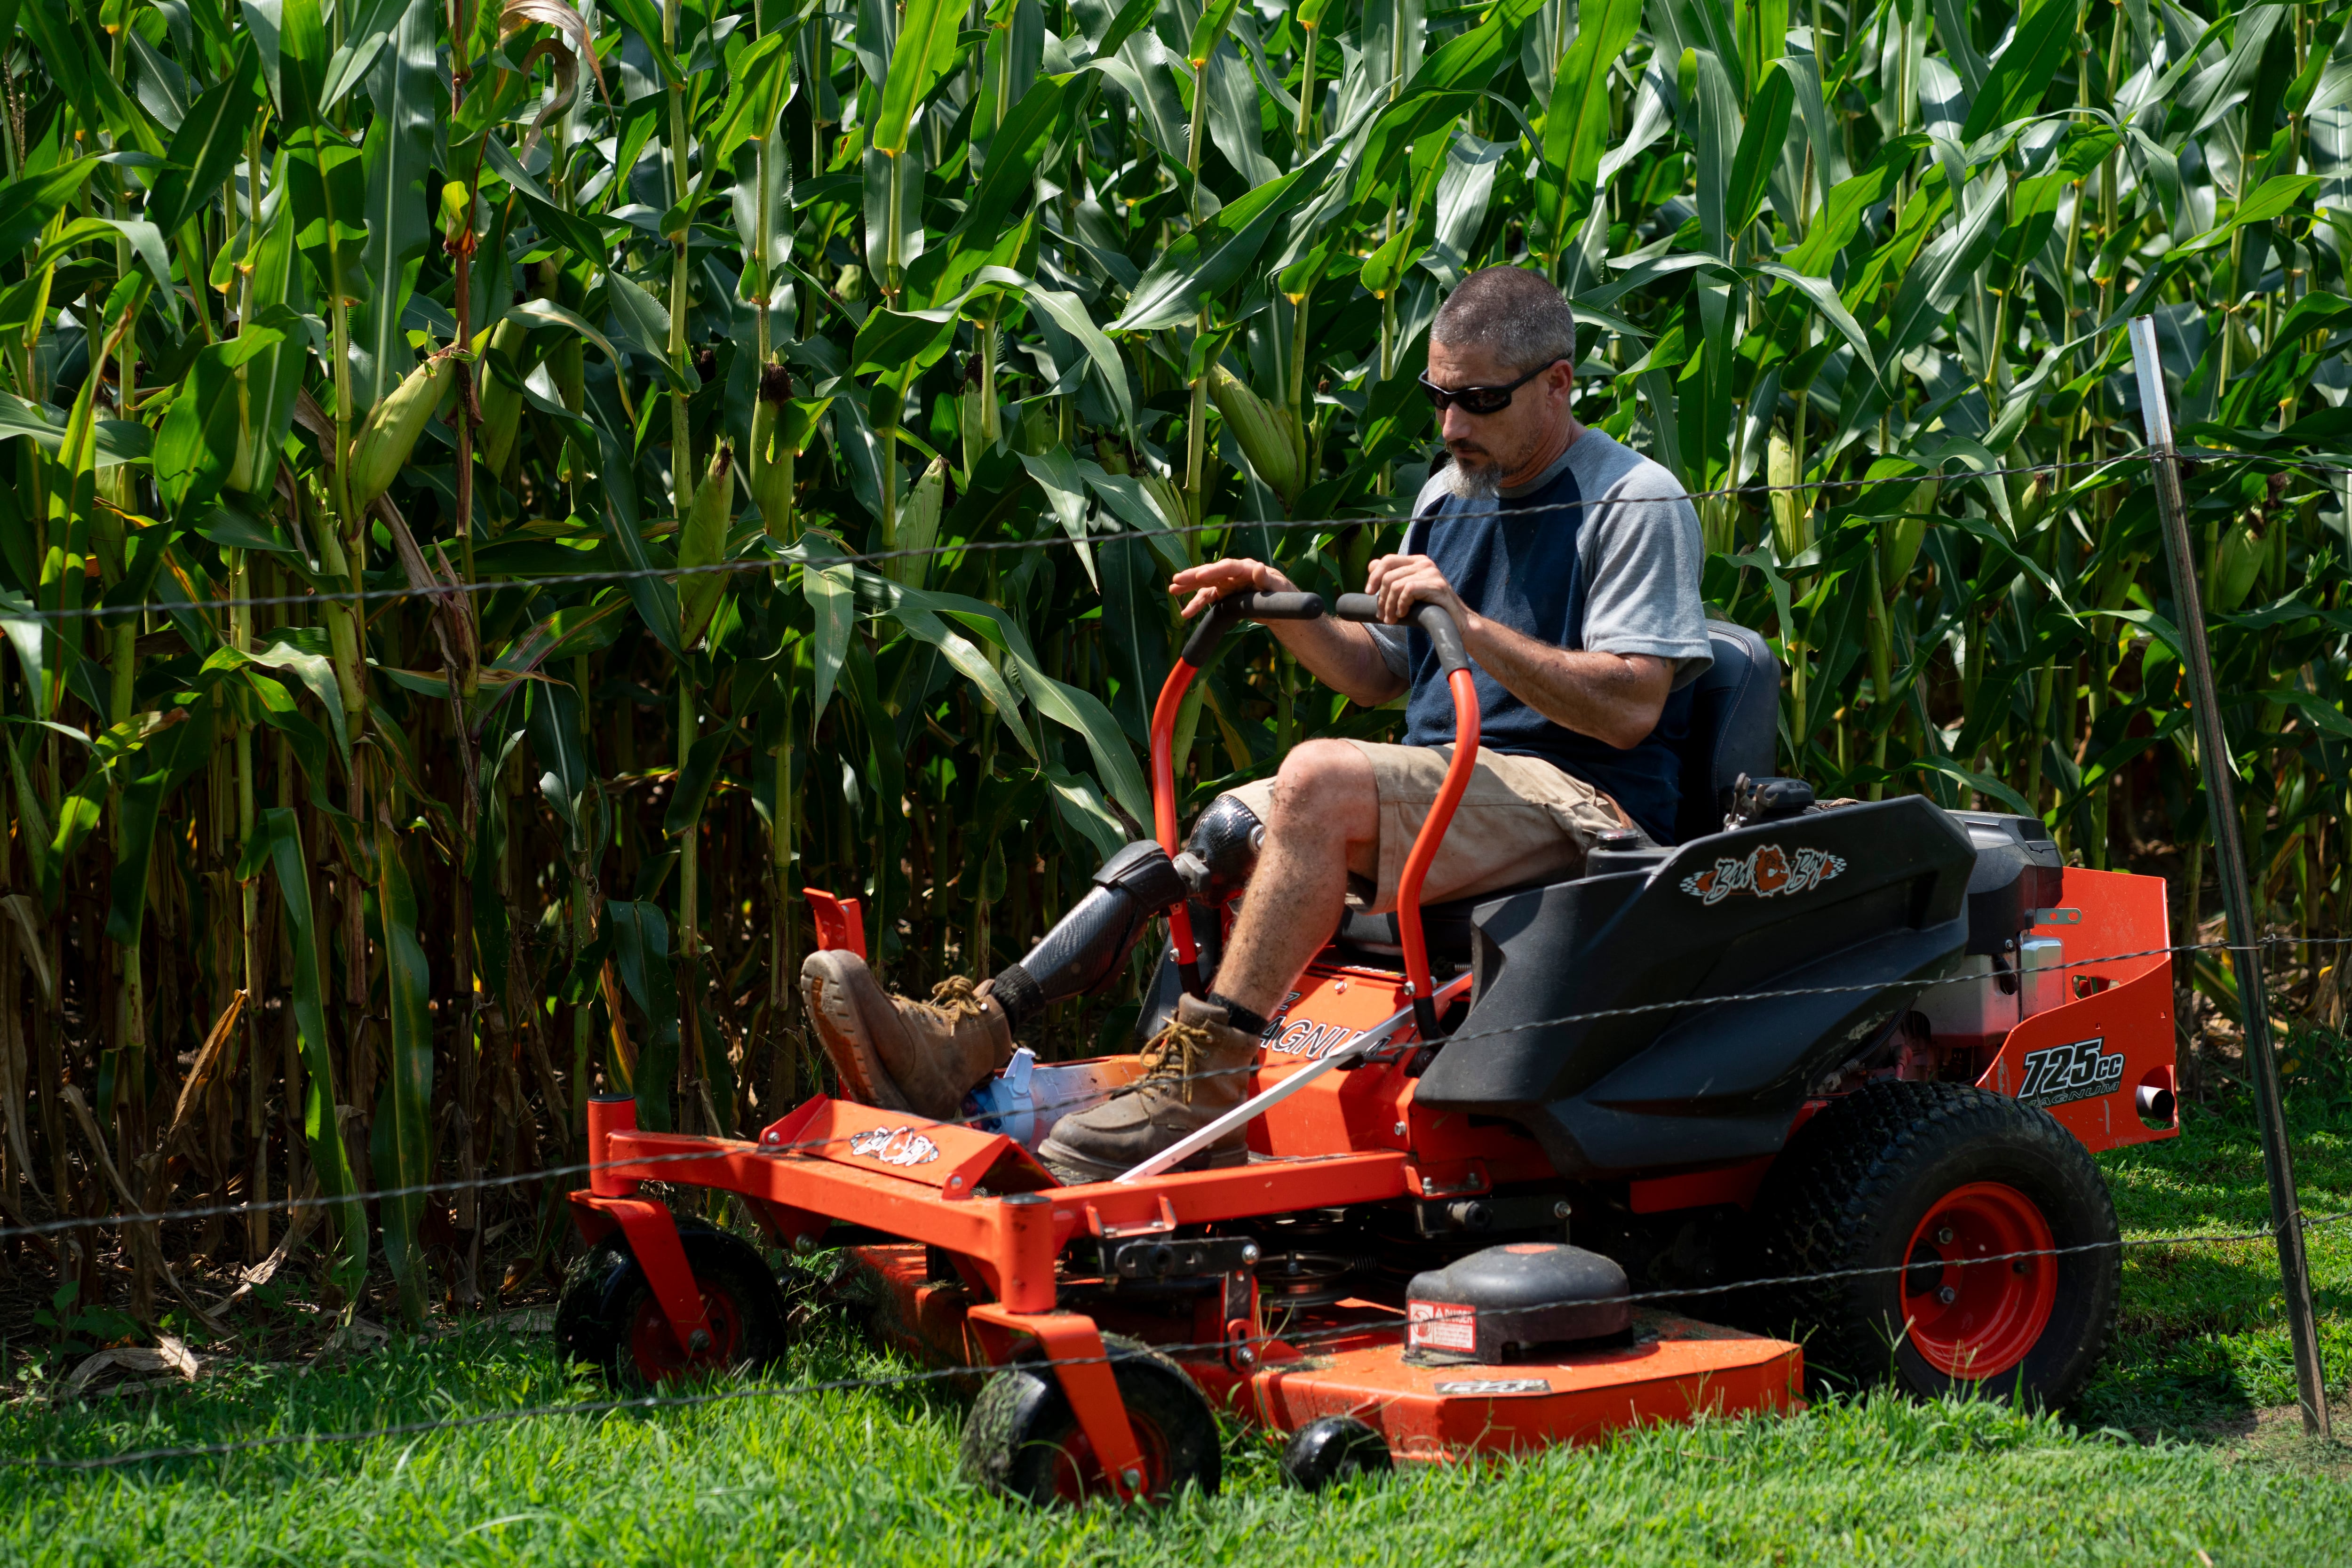 (Denny Simmons | The Tennessean) Scott Restivo finishes up the mowing of his family's rental property in Cedar Hill, Tenn., Tuesday, July 30, 2024. Restivo, a disabled U.S. Army veteran now uses a prosthetic leg in place of the one he lost after a life-threatening infection in 2018. He did three tours of duty in Iraq and Afghanistan and was injured in a guard tower rocket attack in 2012.